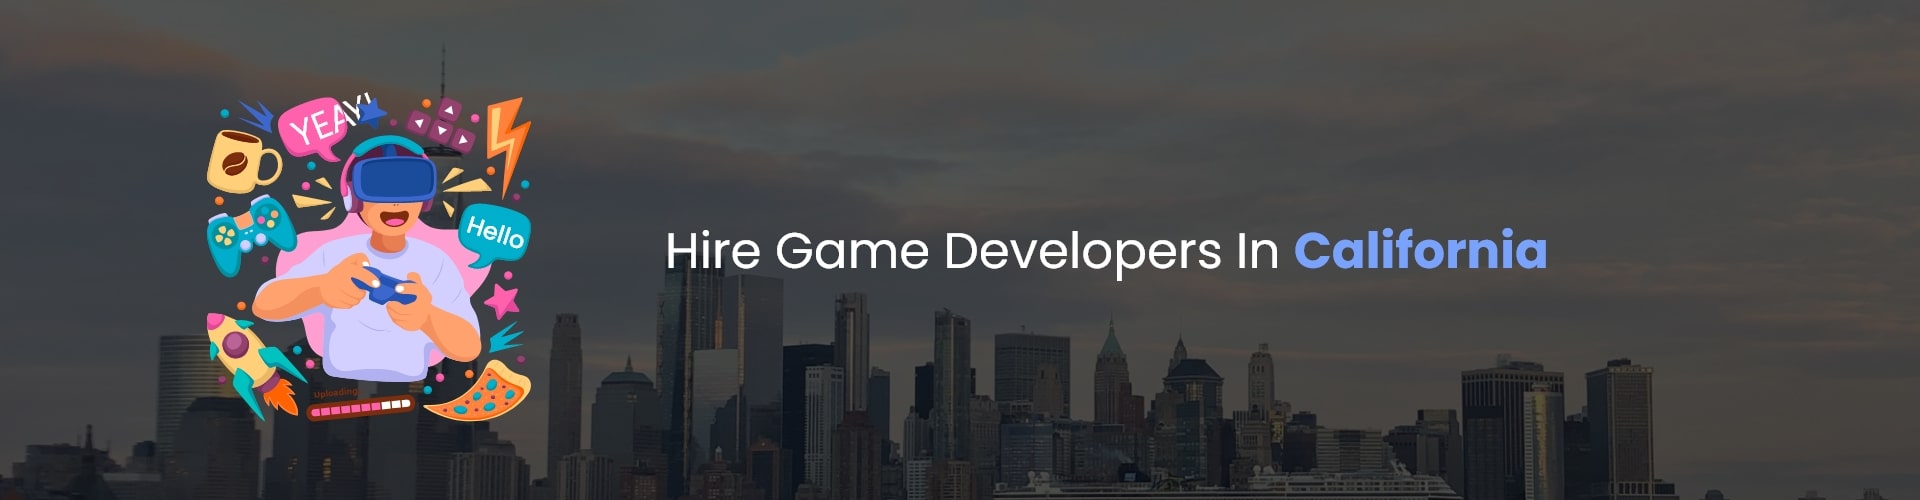 hire game developers in california